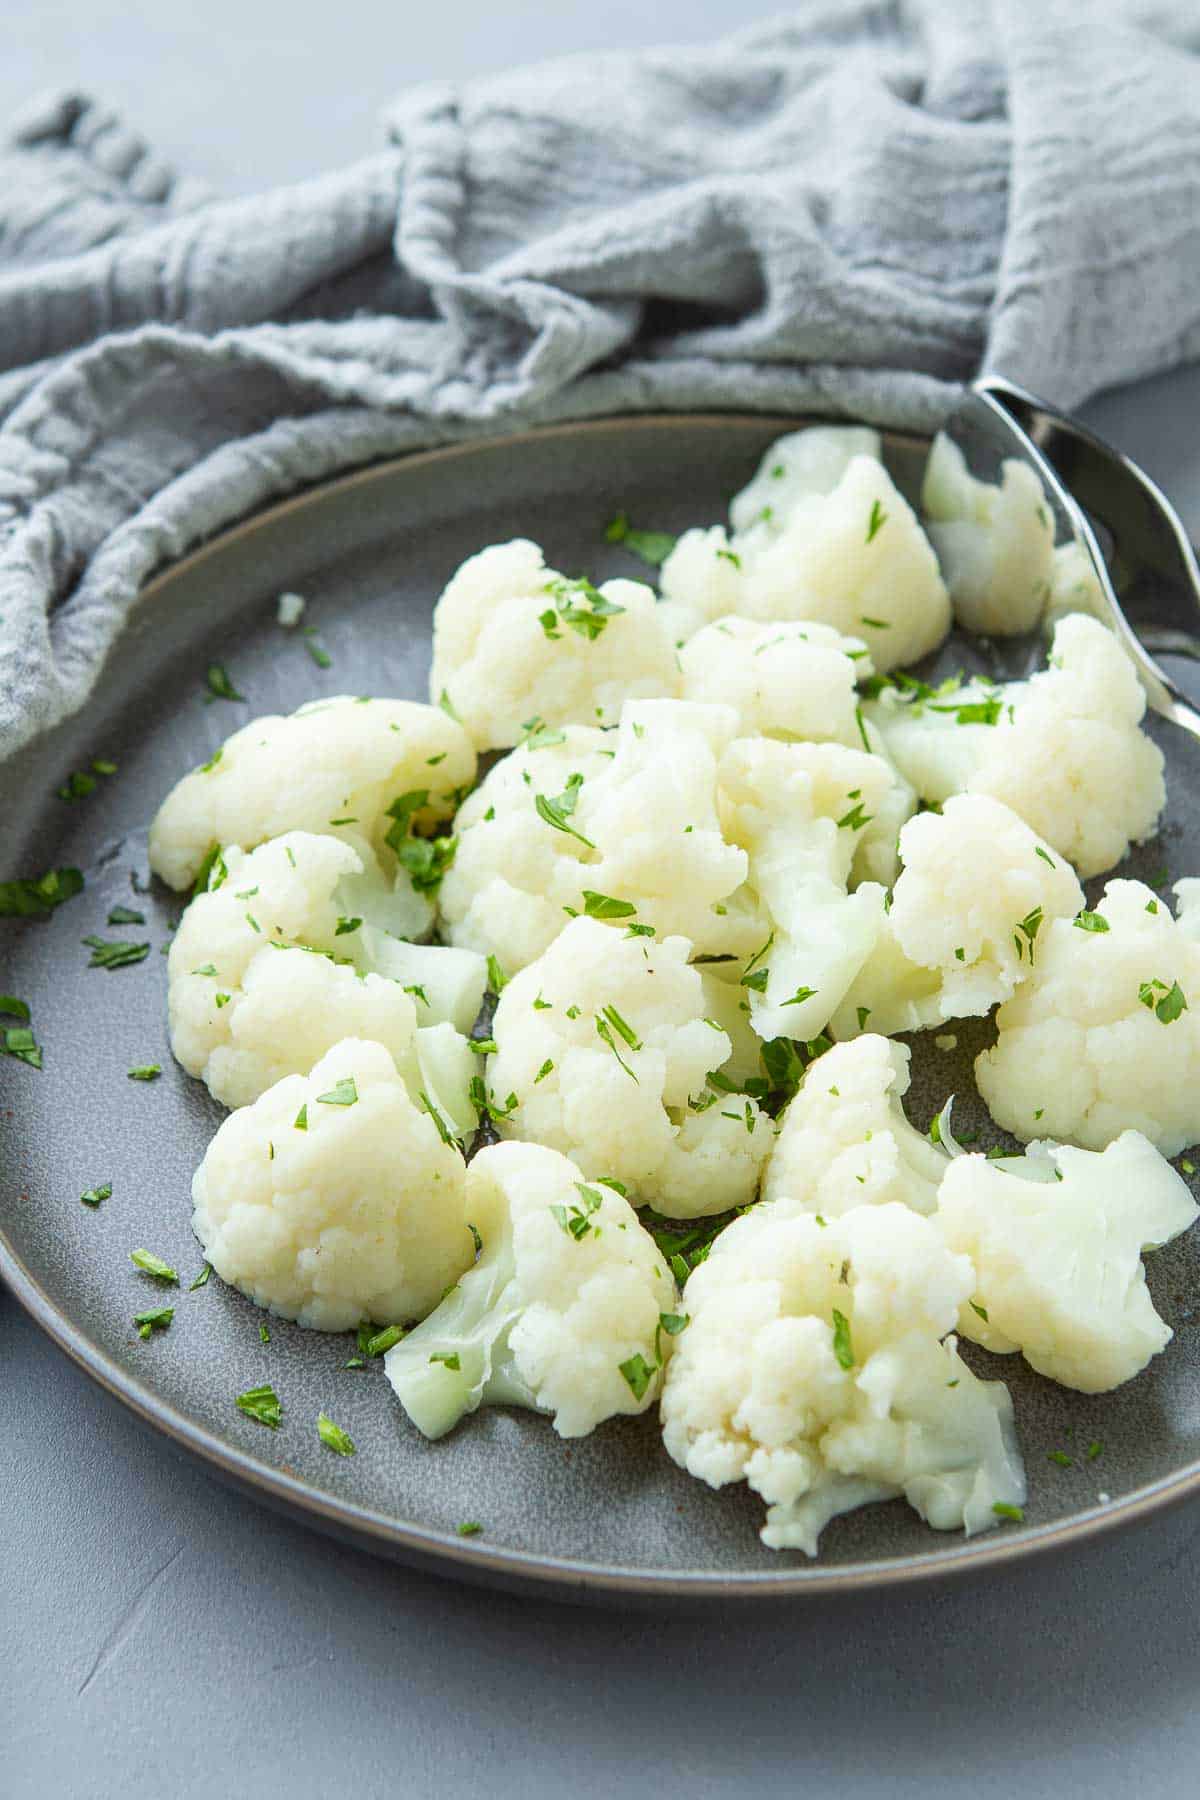 This step-by-step tutorial on how to steam cauliflower shows just how easy it is to get a healthy vegetable side dish on the table! | On the stove | In microwave